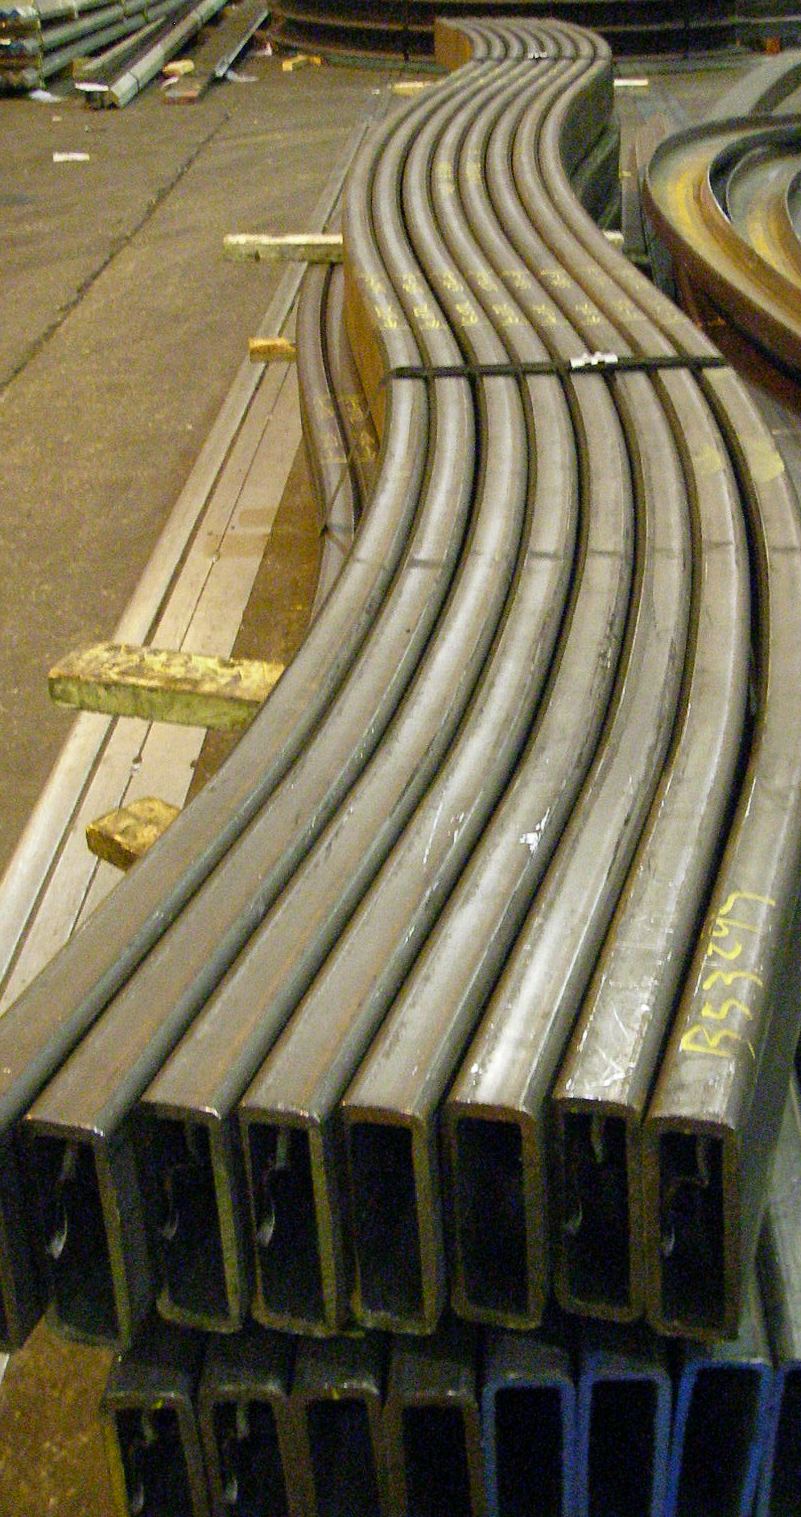 Methods to Bend Tubing and Pipe into an “S” Curve - The Chicago Curve